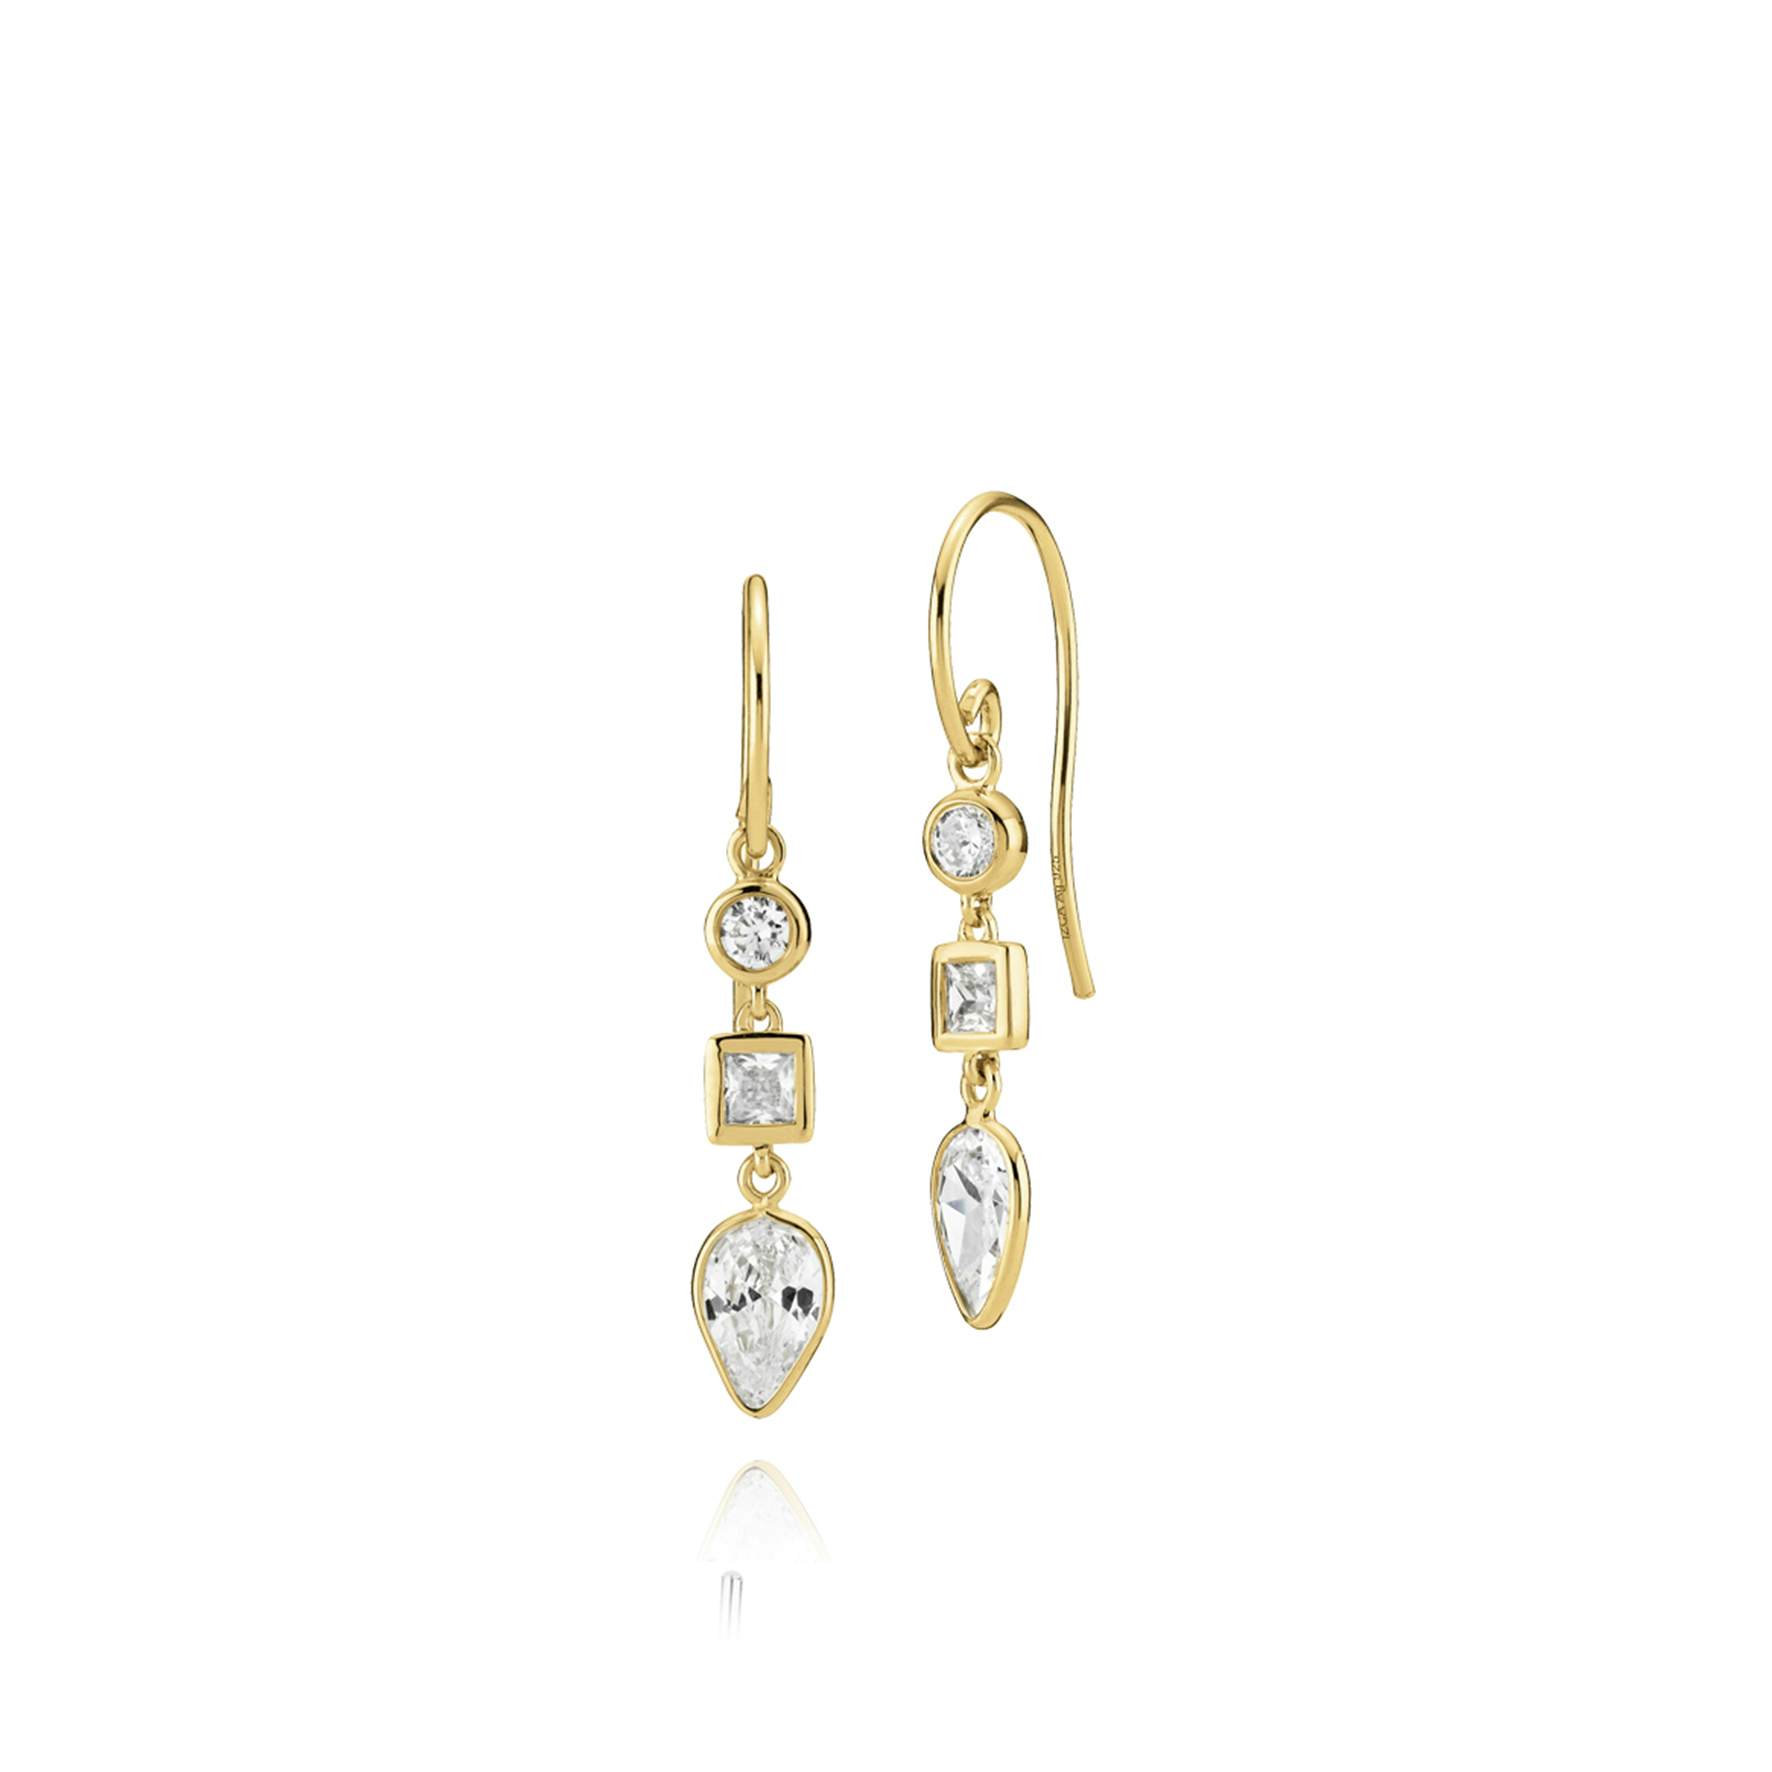 Aya Large Earrings from Izabel Camille in Goldplated-Silver Sterling 925